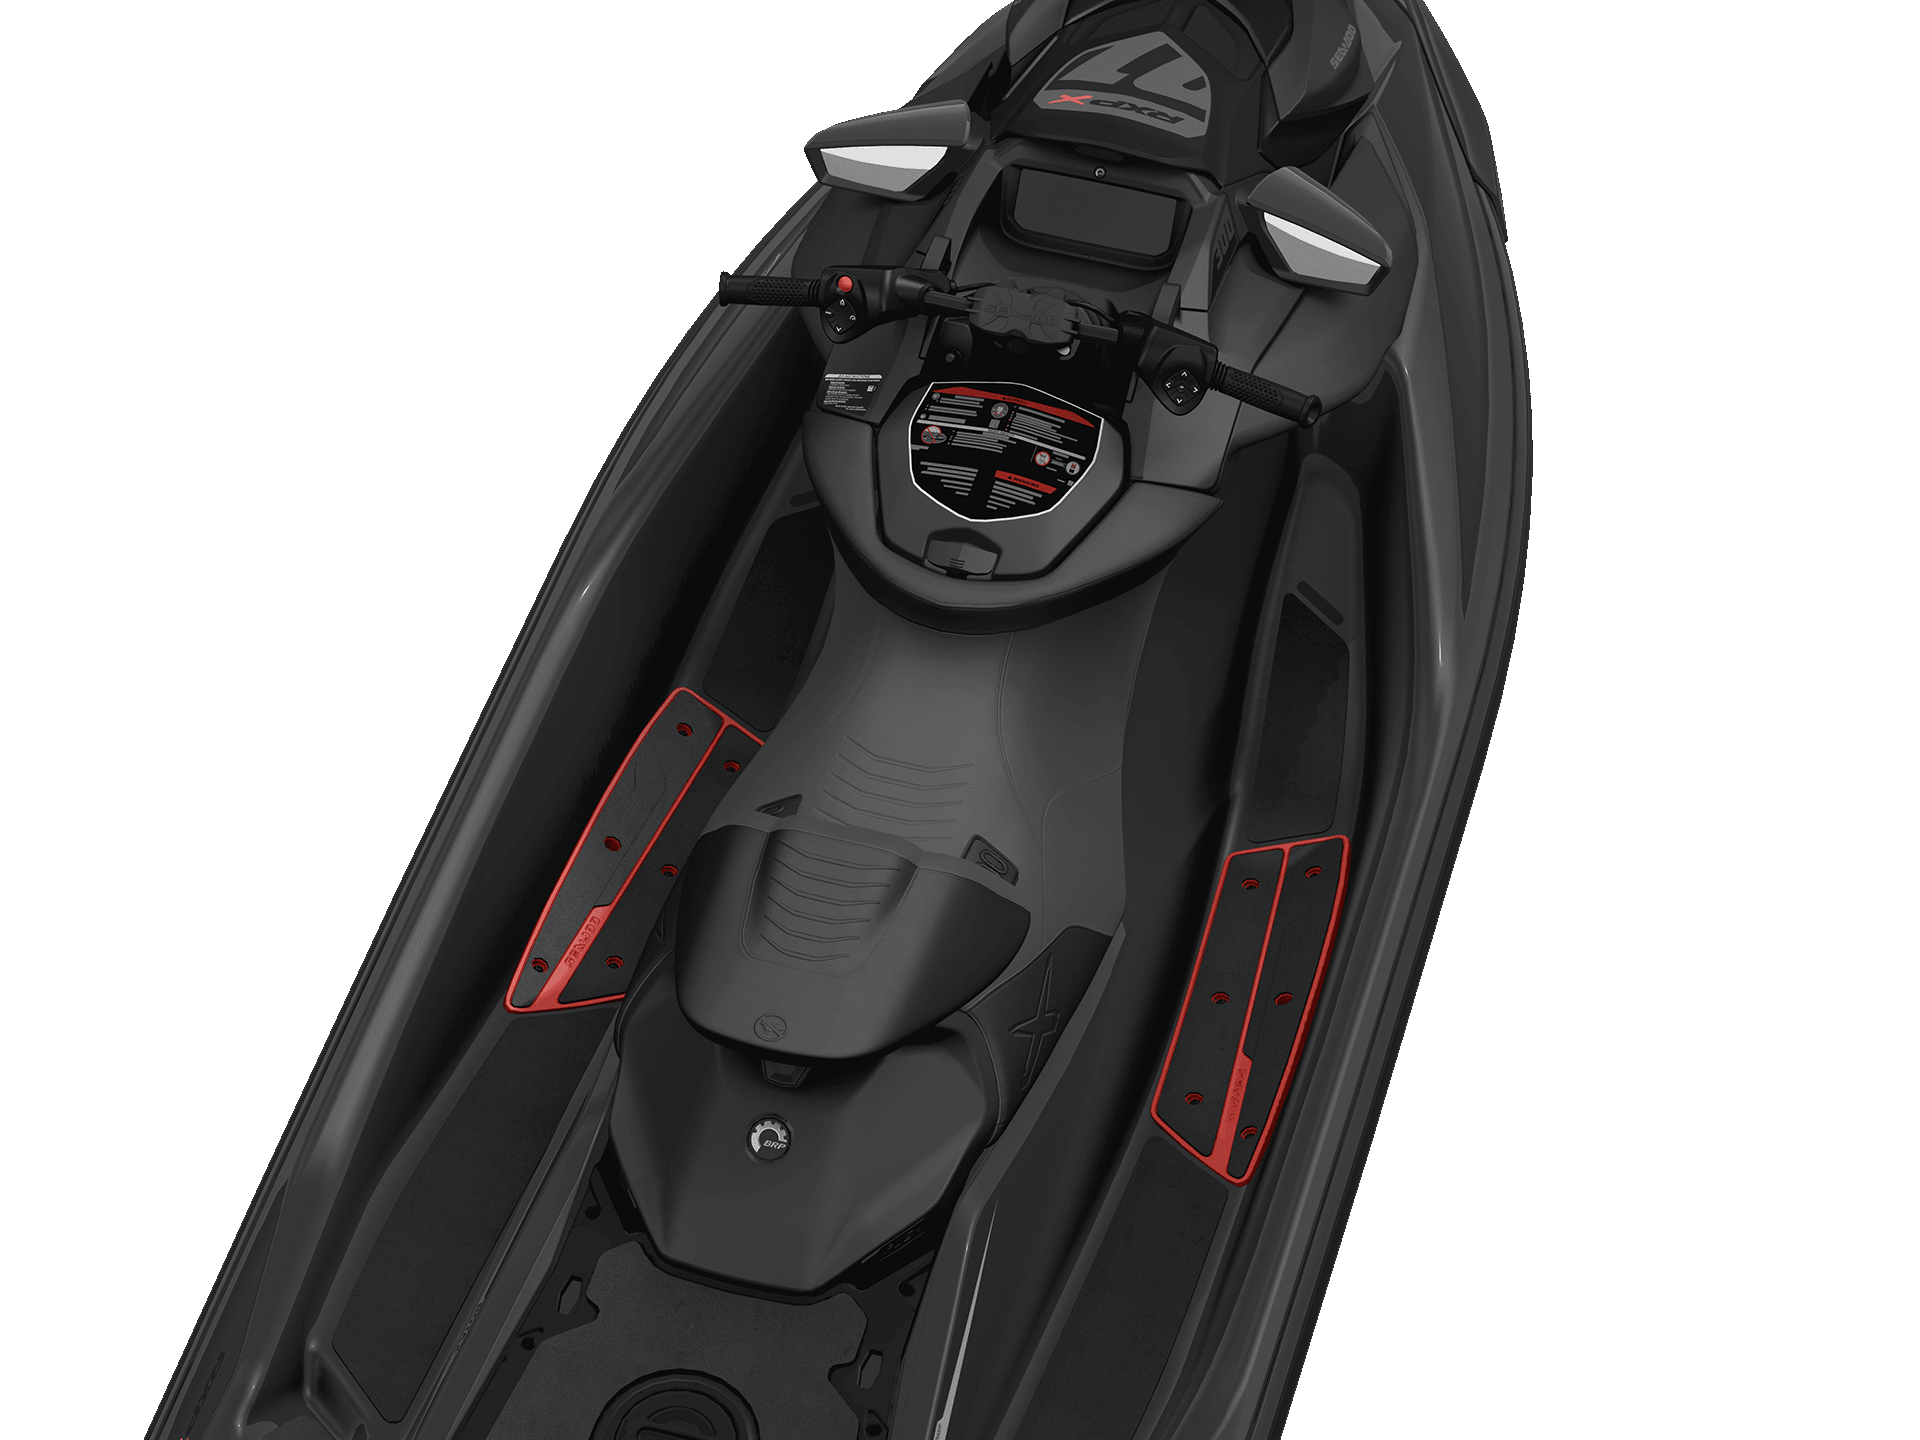 Double-angled footwell wedges on the RXP-X